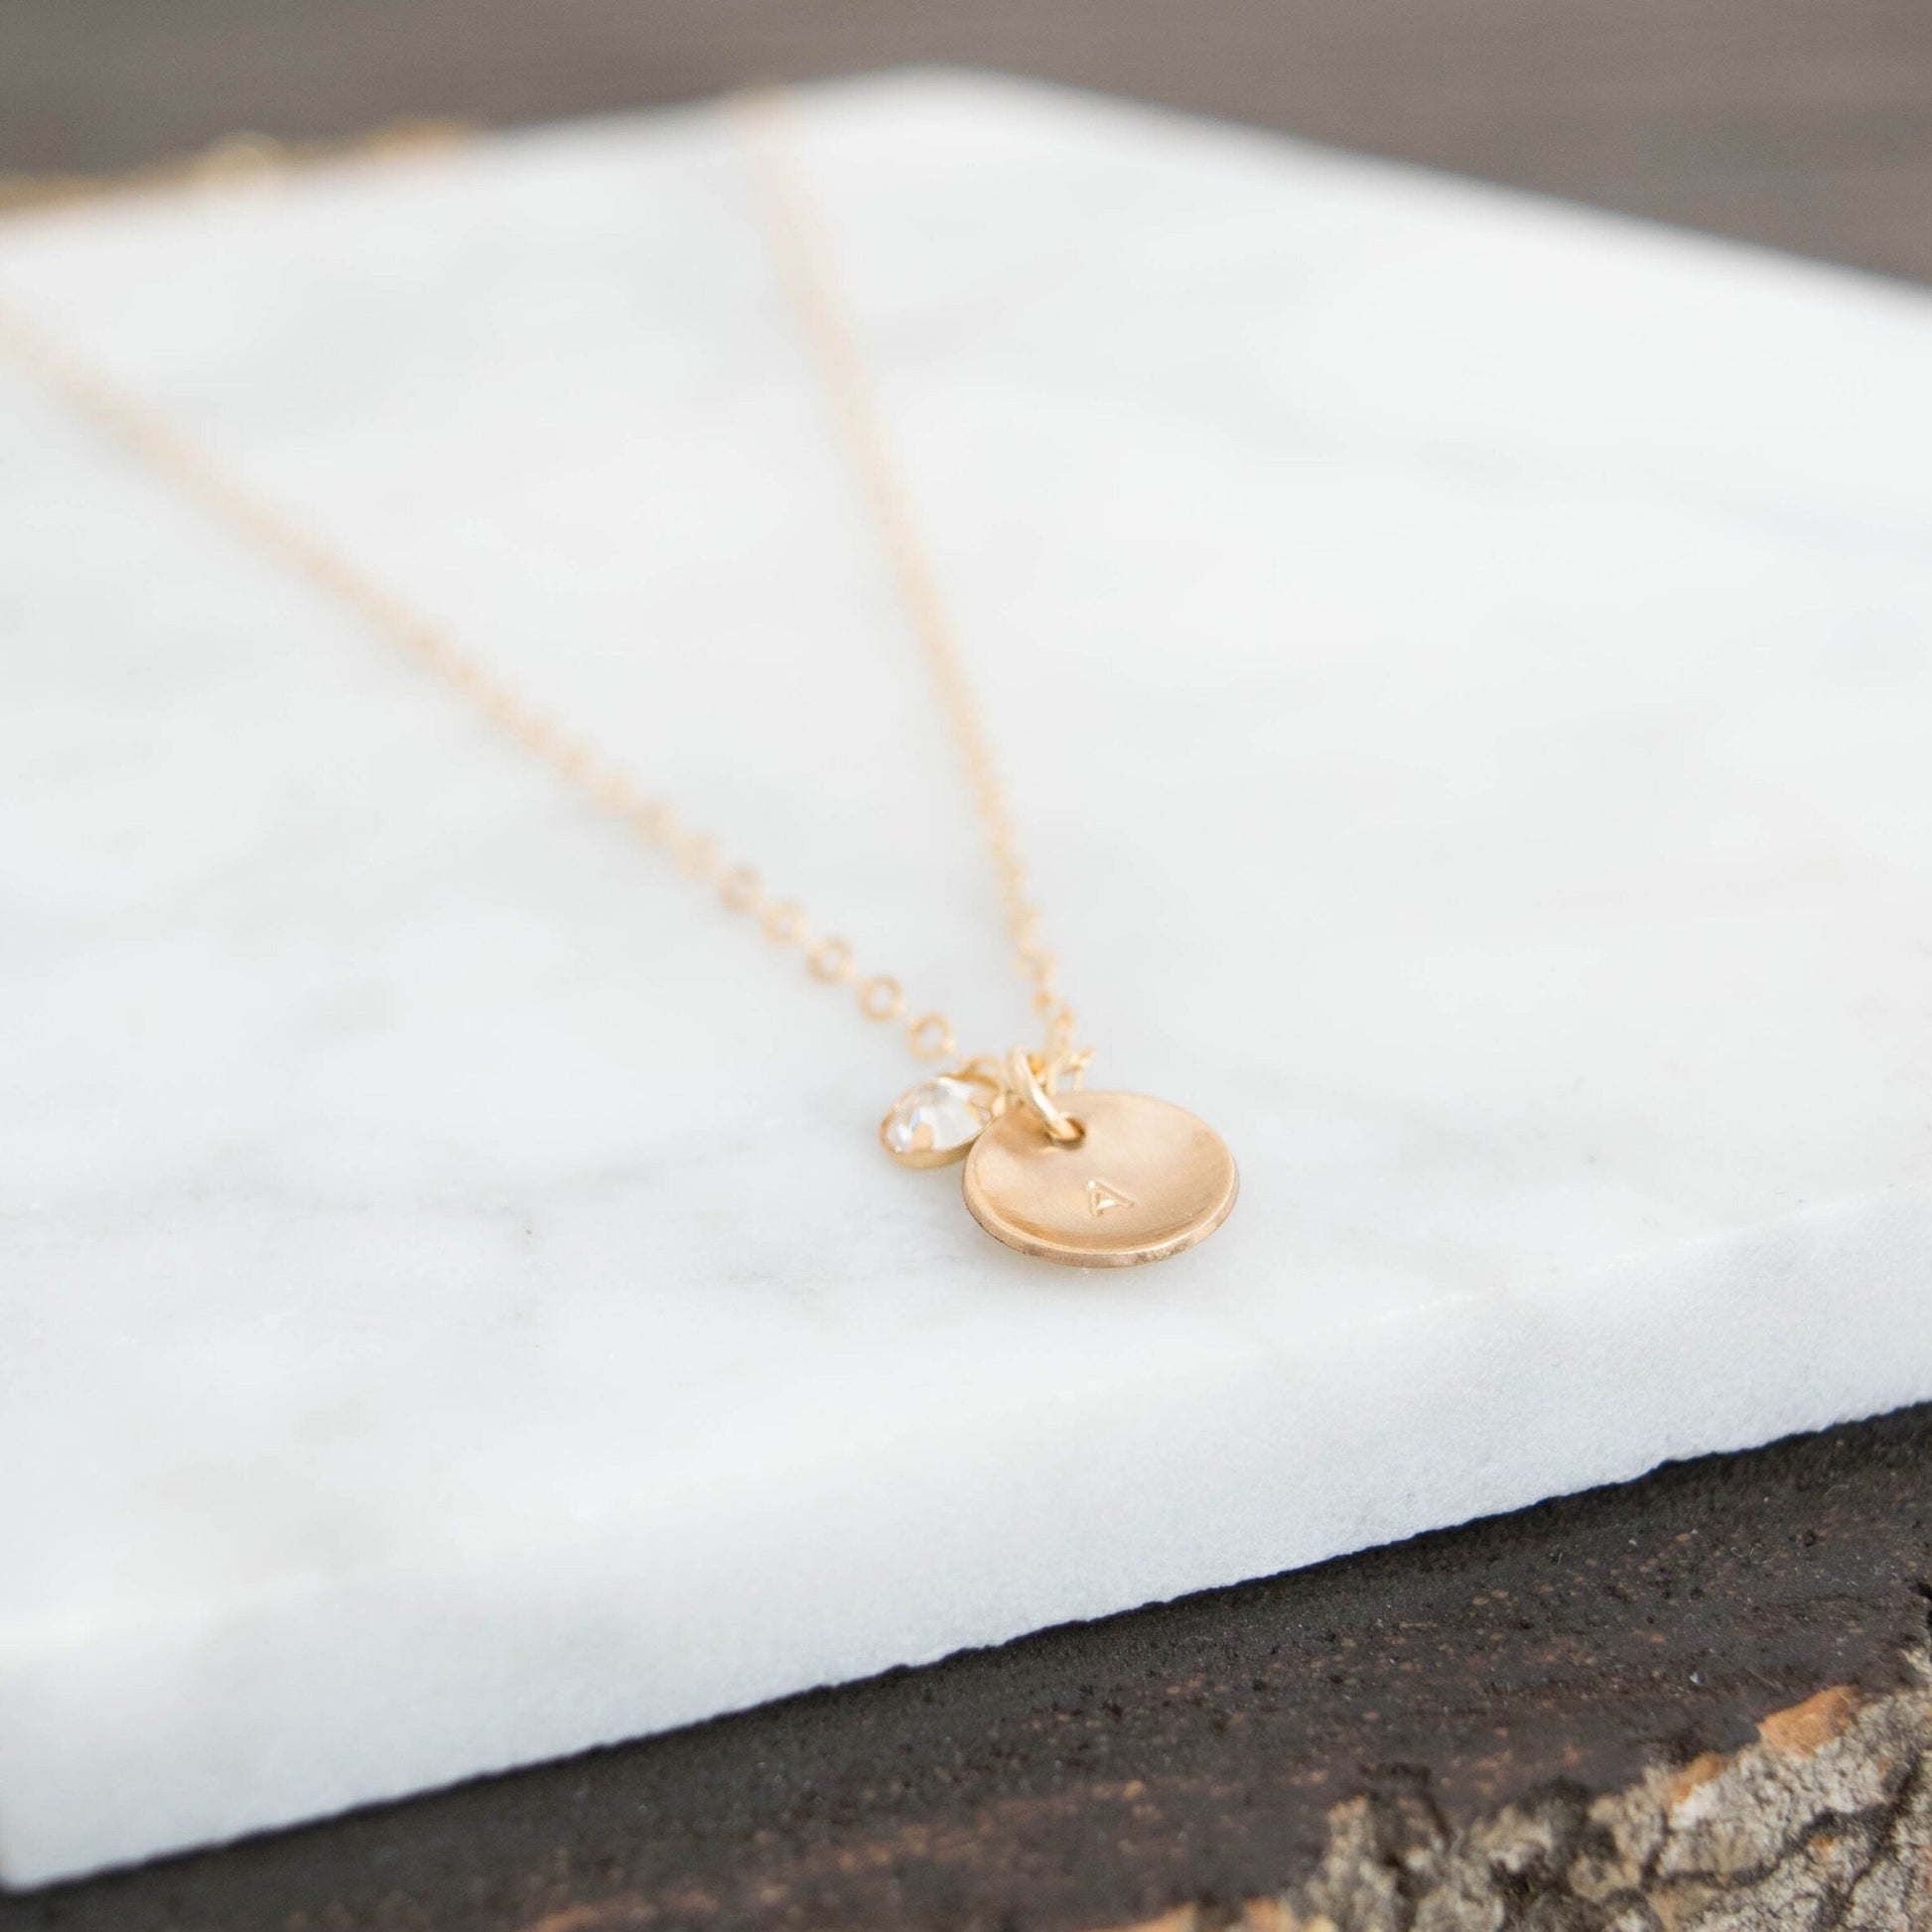 Subtly Hidden Initial Disc Necklace - Minimalist and Elegant Personalized Handmade Jewelry